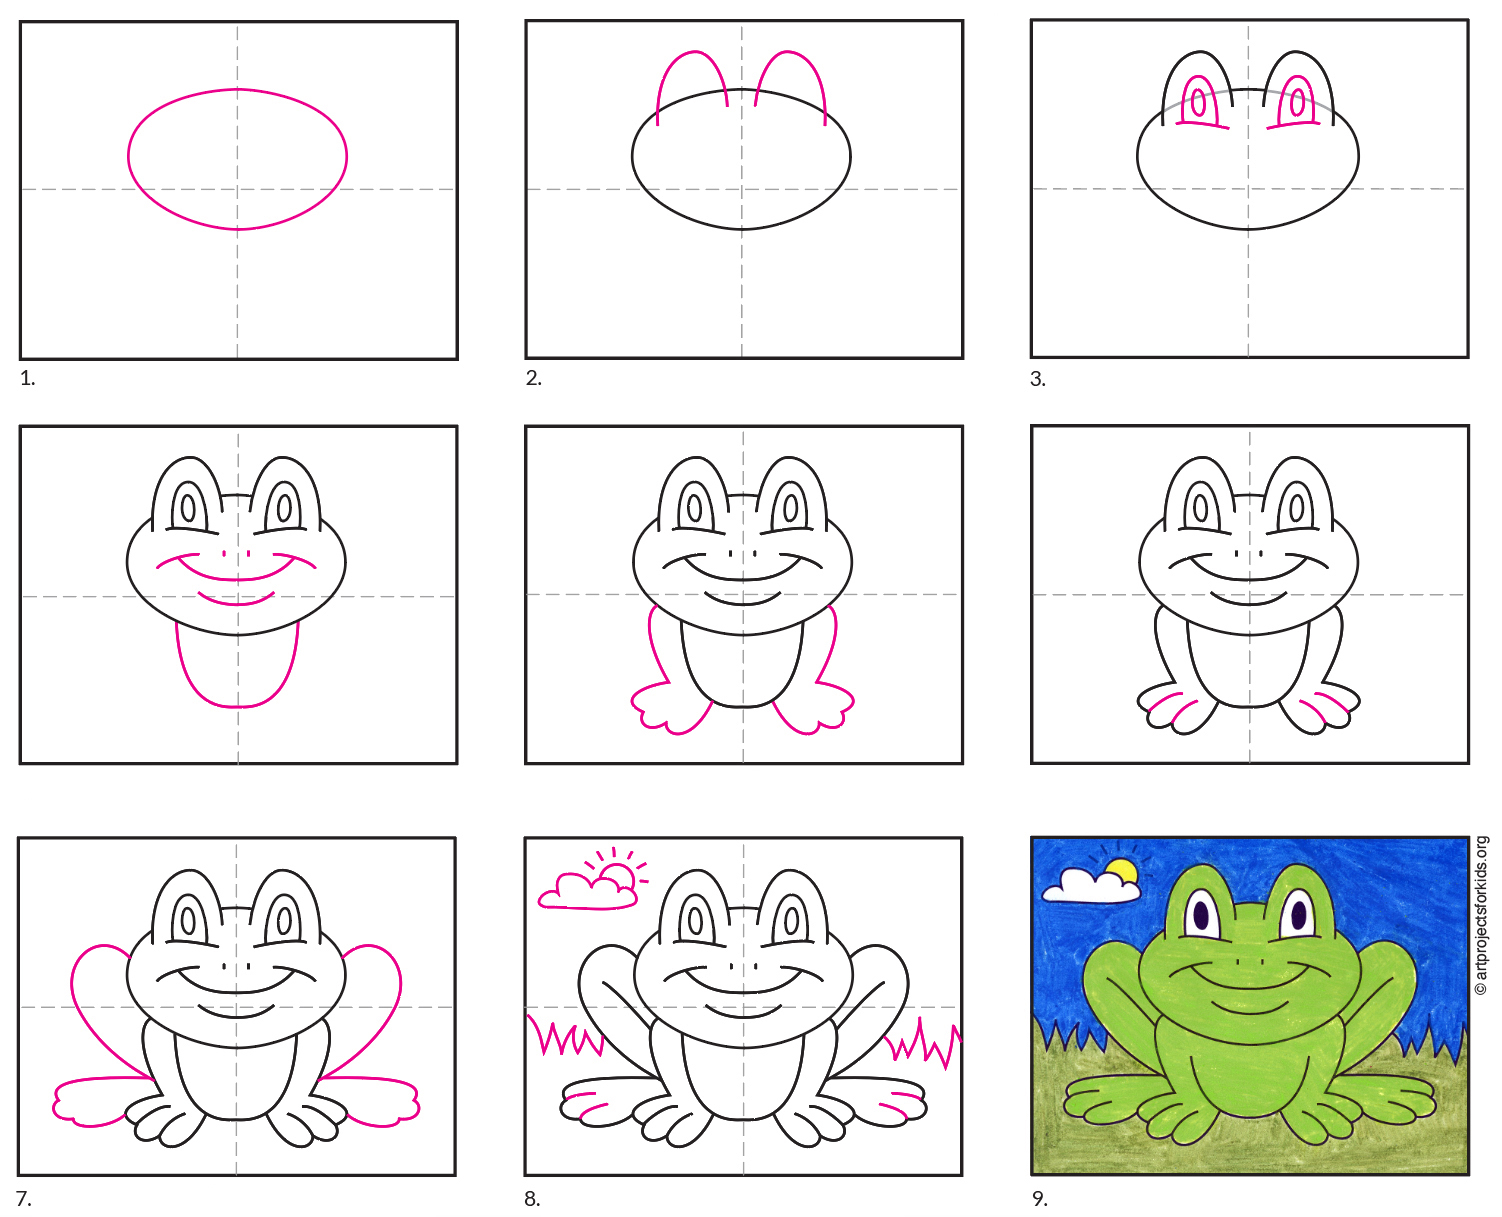 How To Draw A Frog Frog Art Easy Cartoon Drawings Drawings | Images and ...